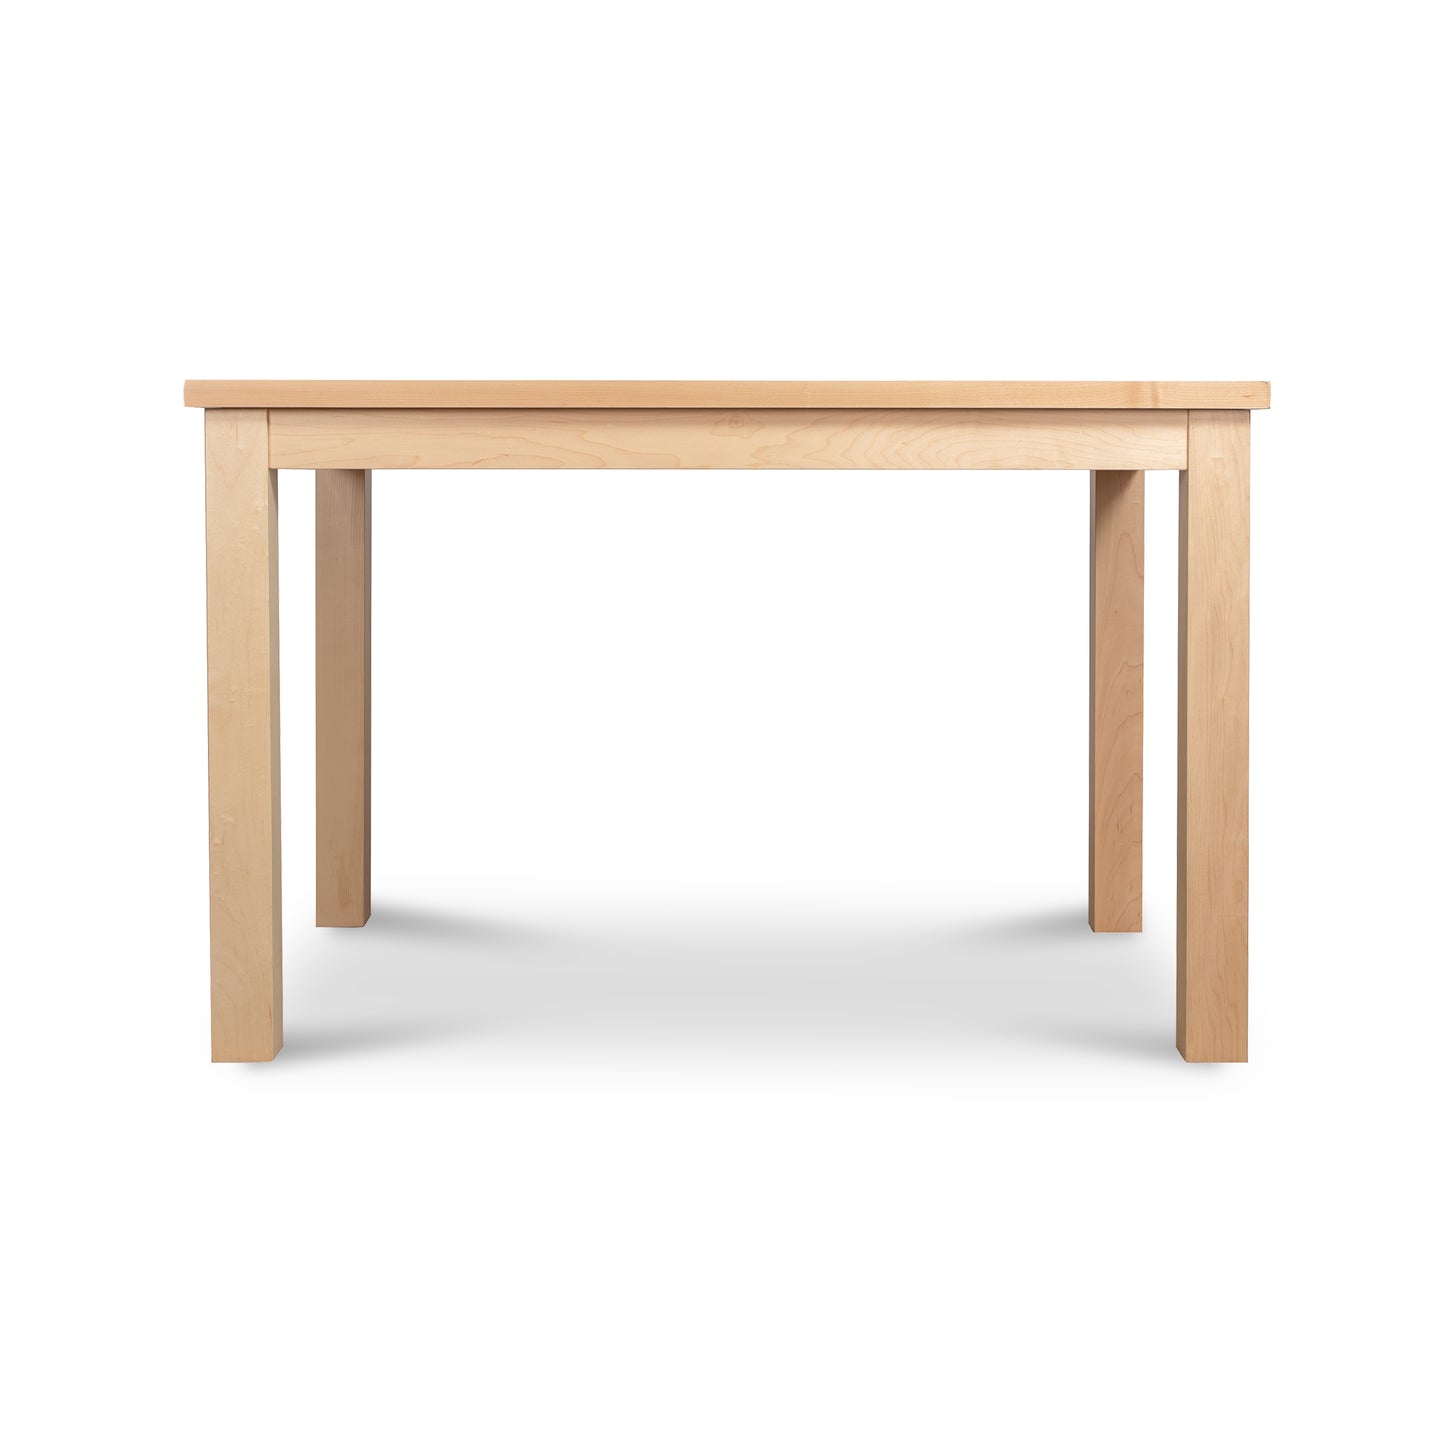 A simple Modern Mission Parsons Solid Top Table in Maple finish by Lyndon Furniture, sustainably harvested woods, standing on four straight legs, isolated on a white background.